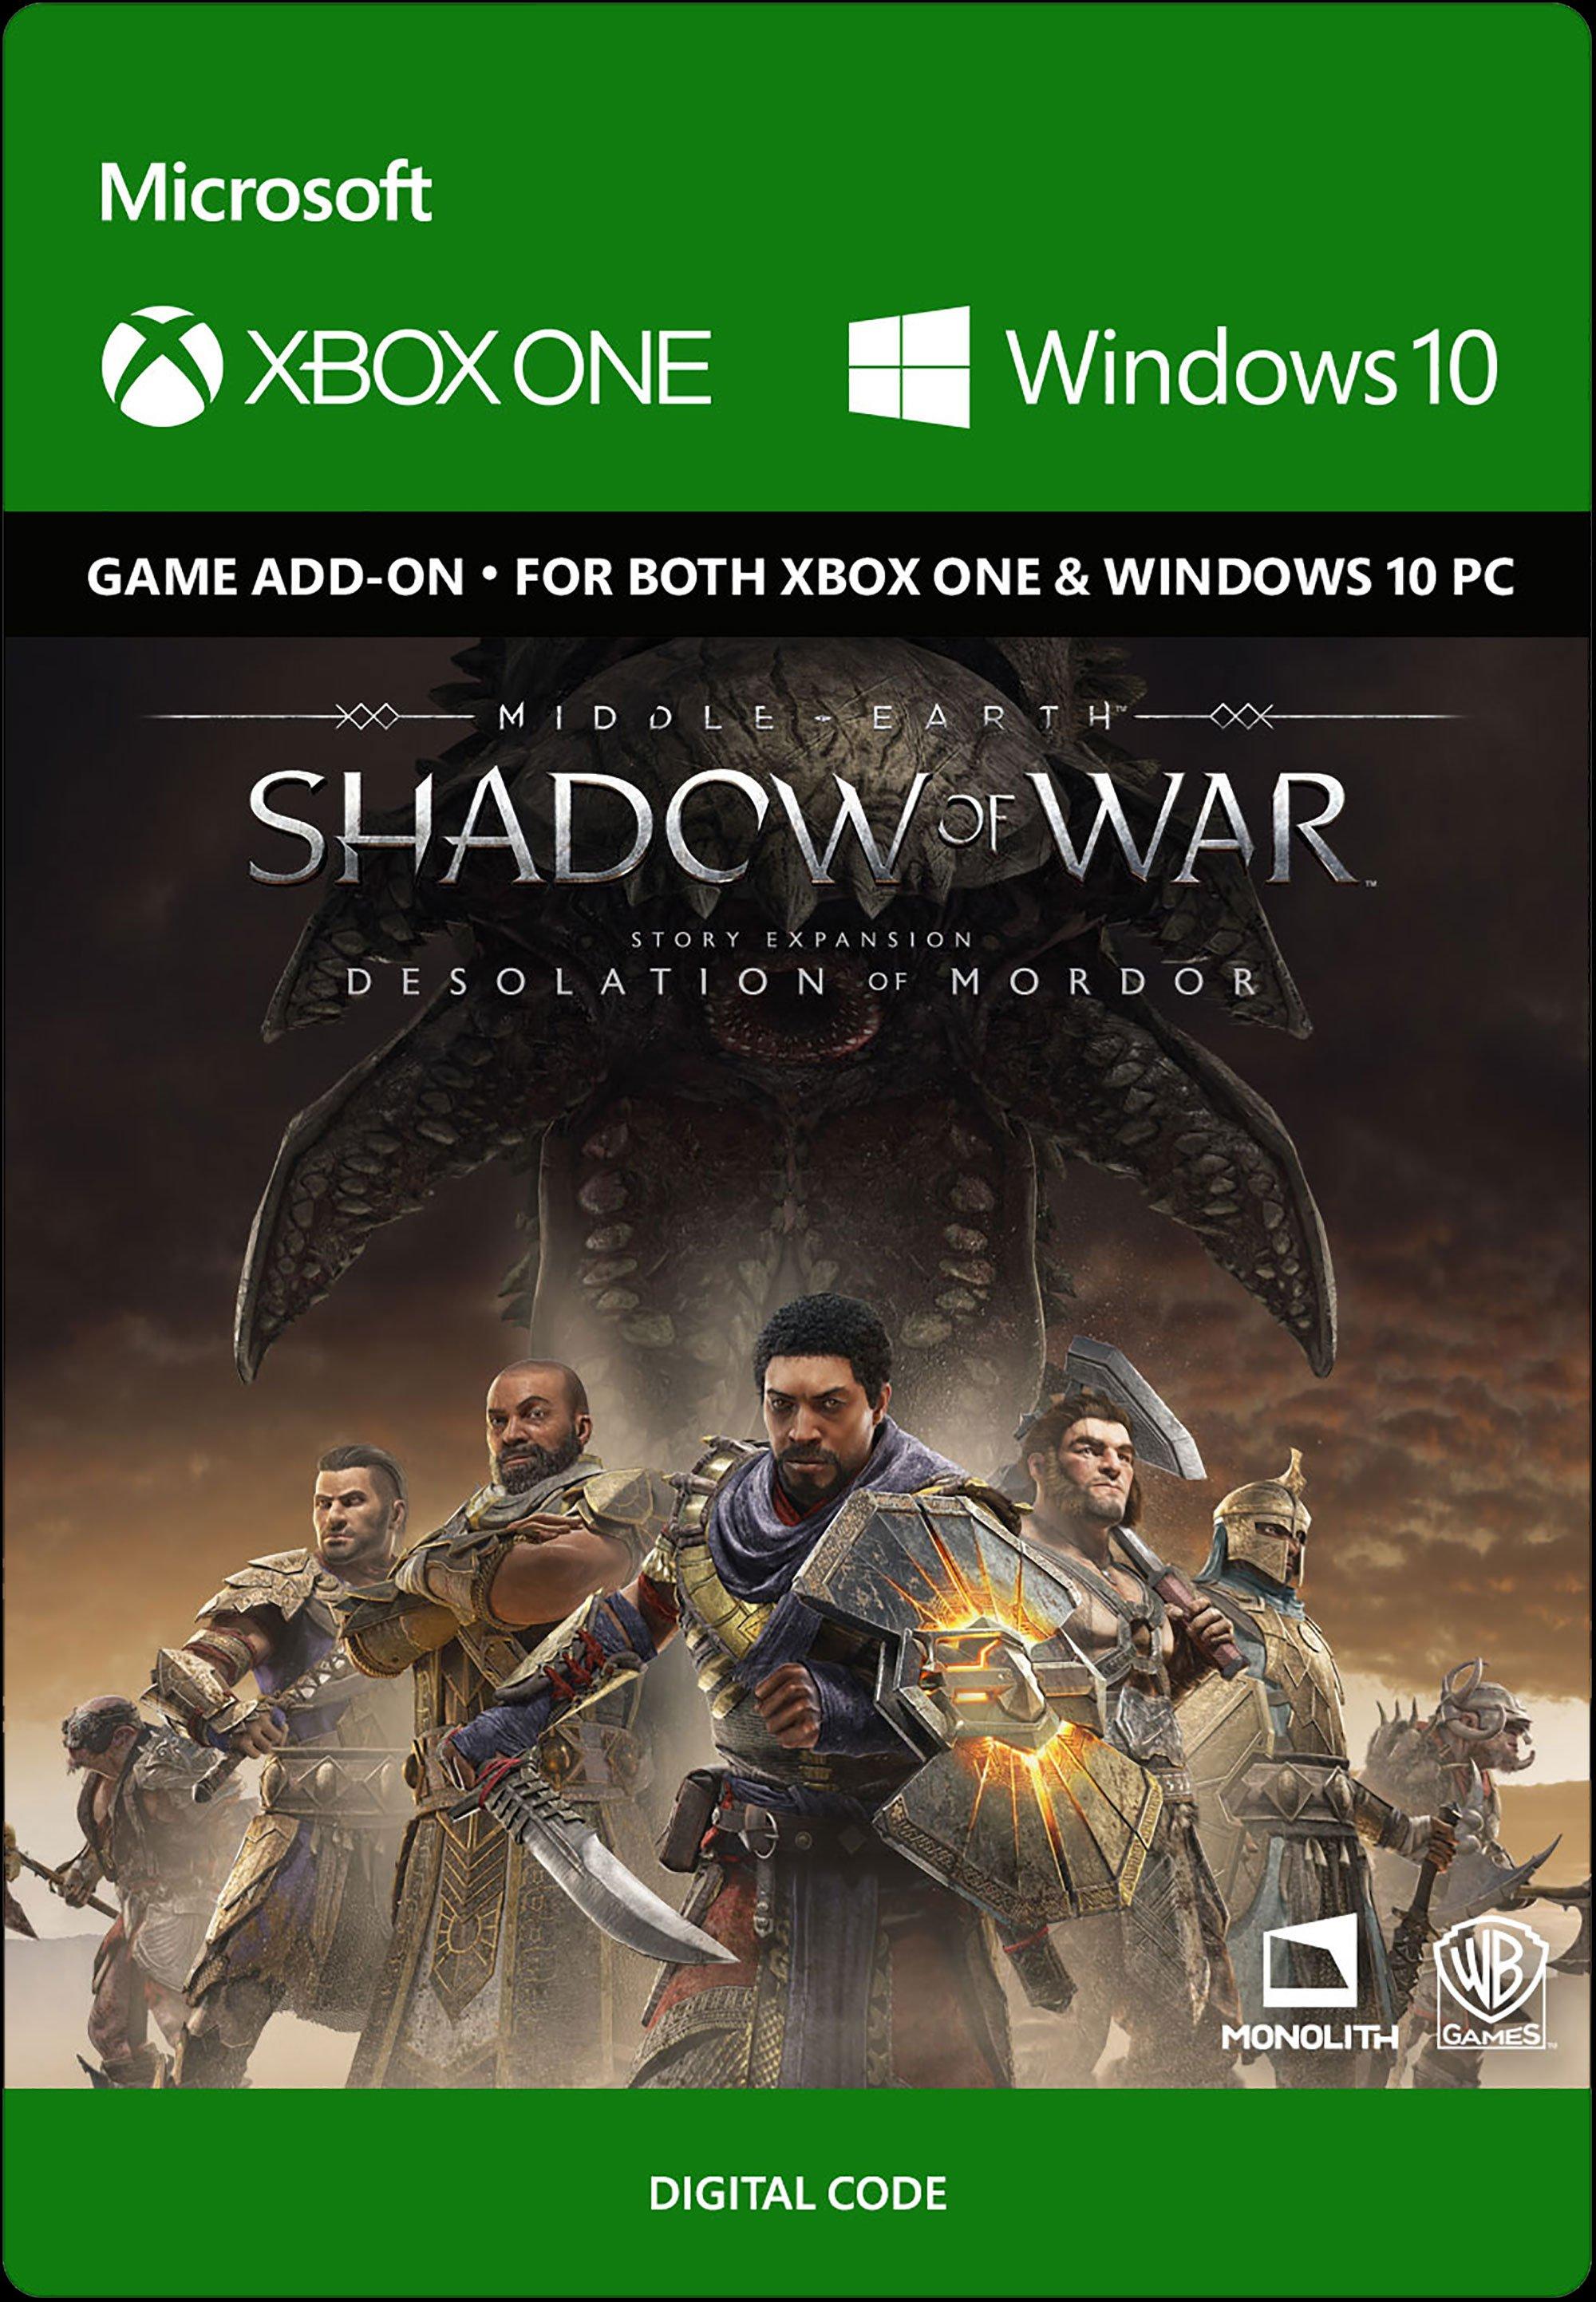 Middle-earth: Shadow of War Desolation of Mordor Story Expansion DLC